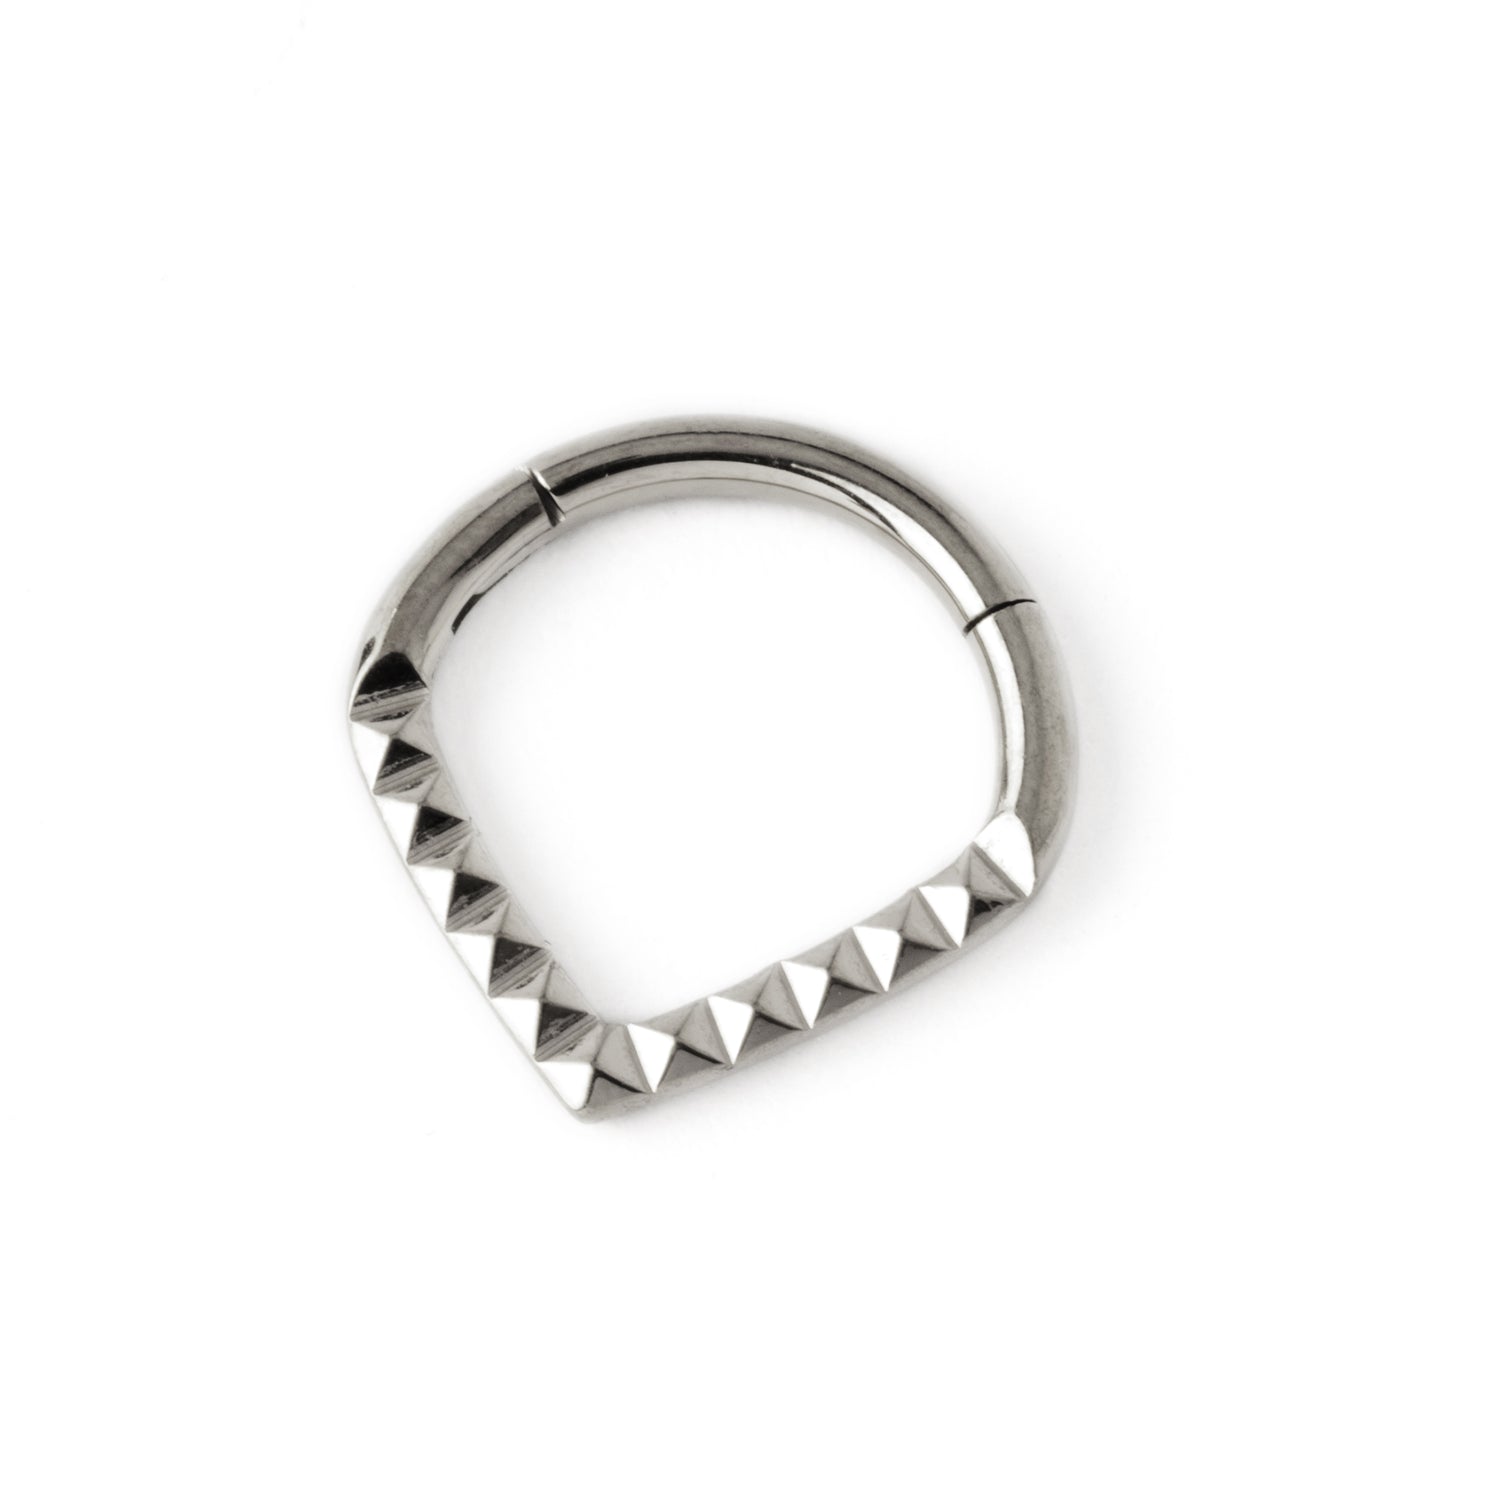 Giza surgical steel teardrop shaped septum clicker right side view